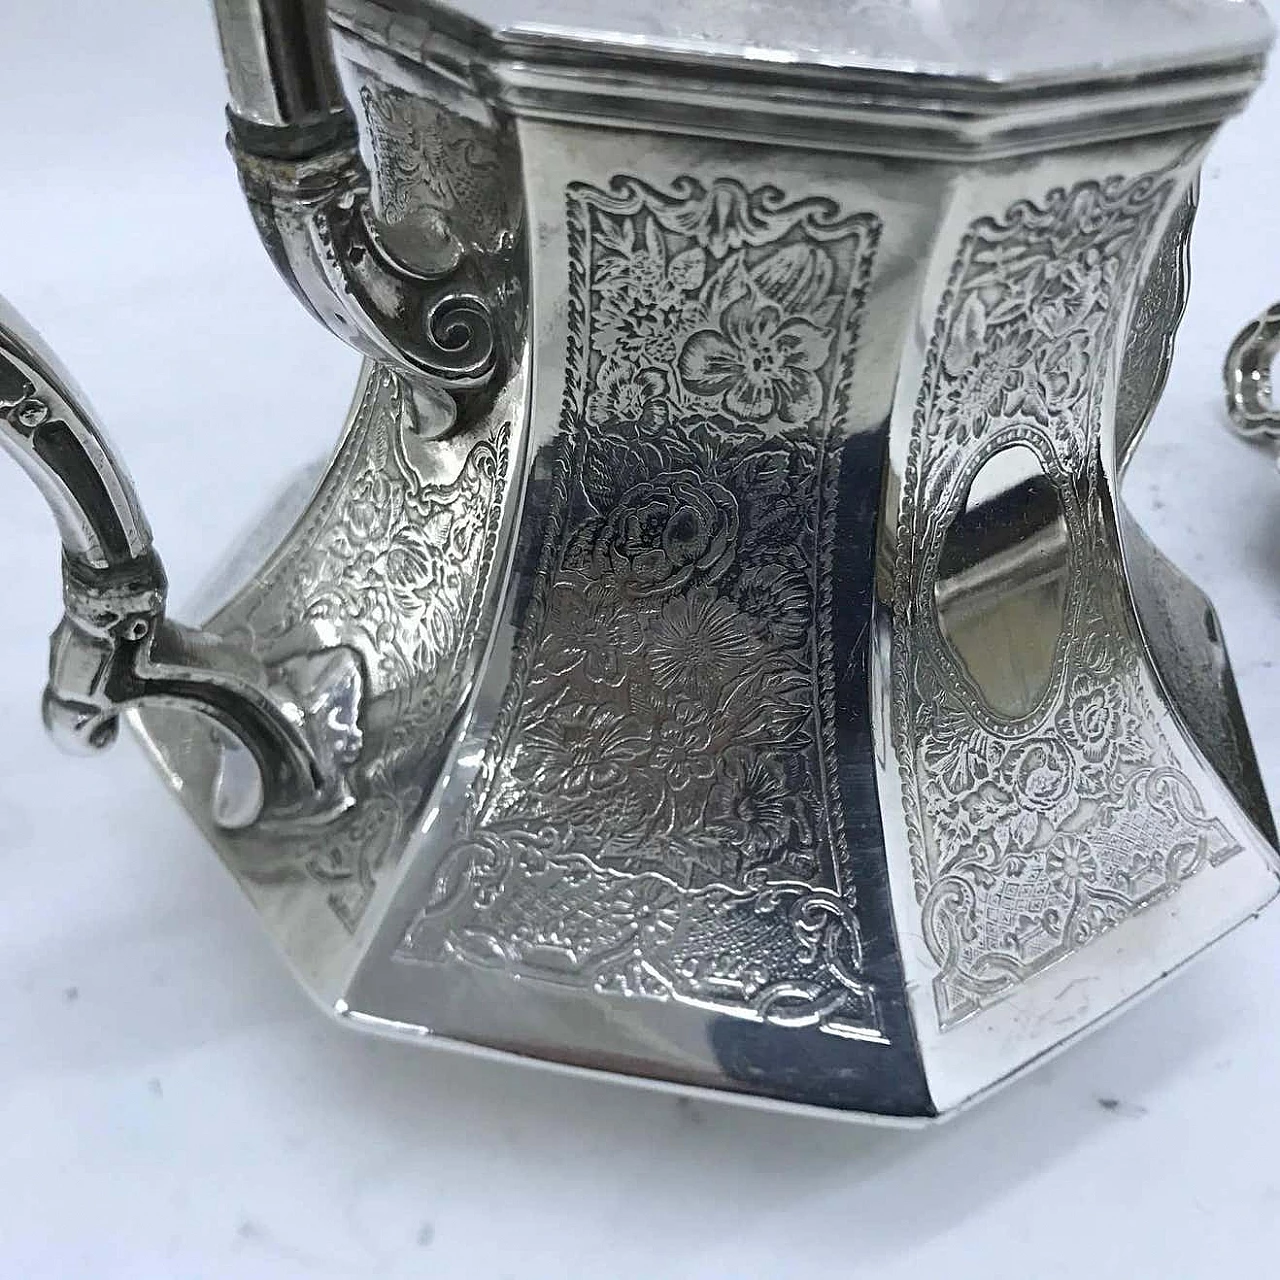 Art Nouveau tea service in engraved silver plated by Skinner & Co, 19th century 1344363